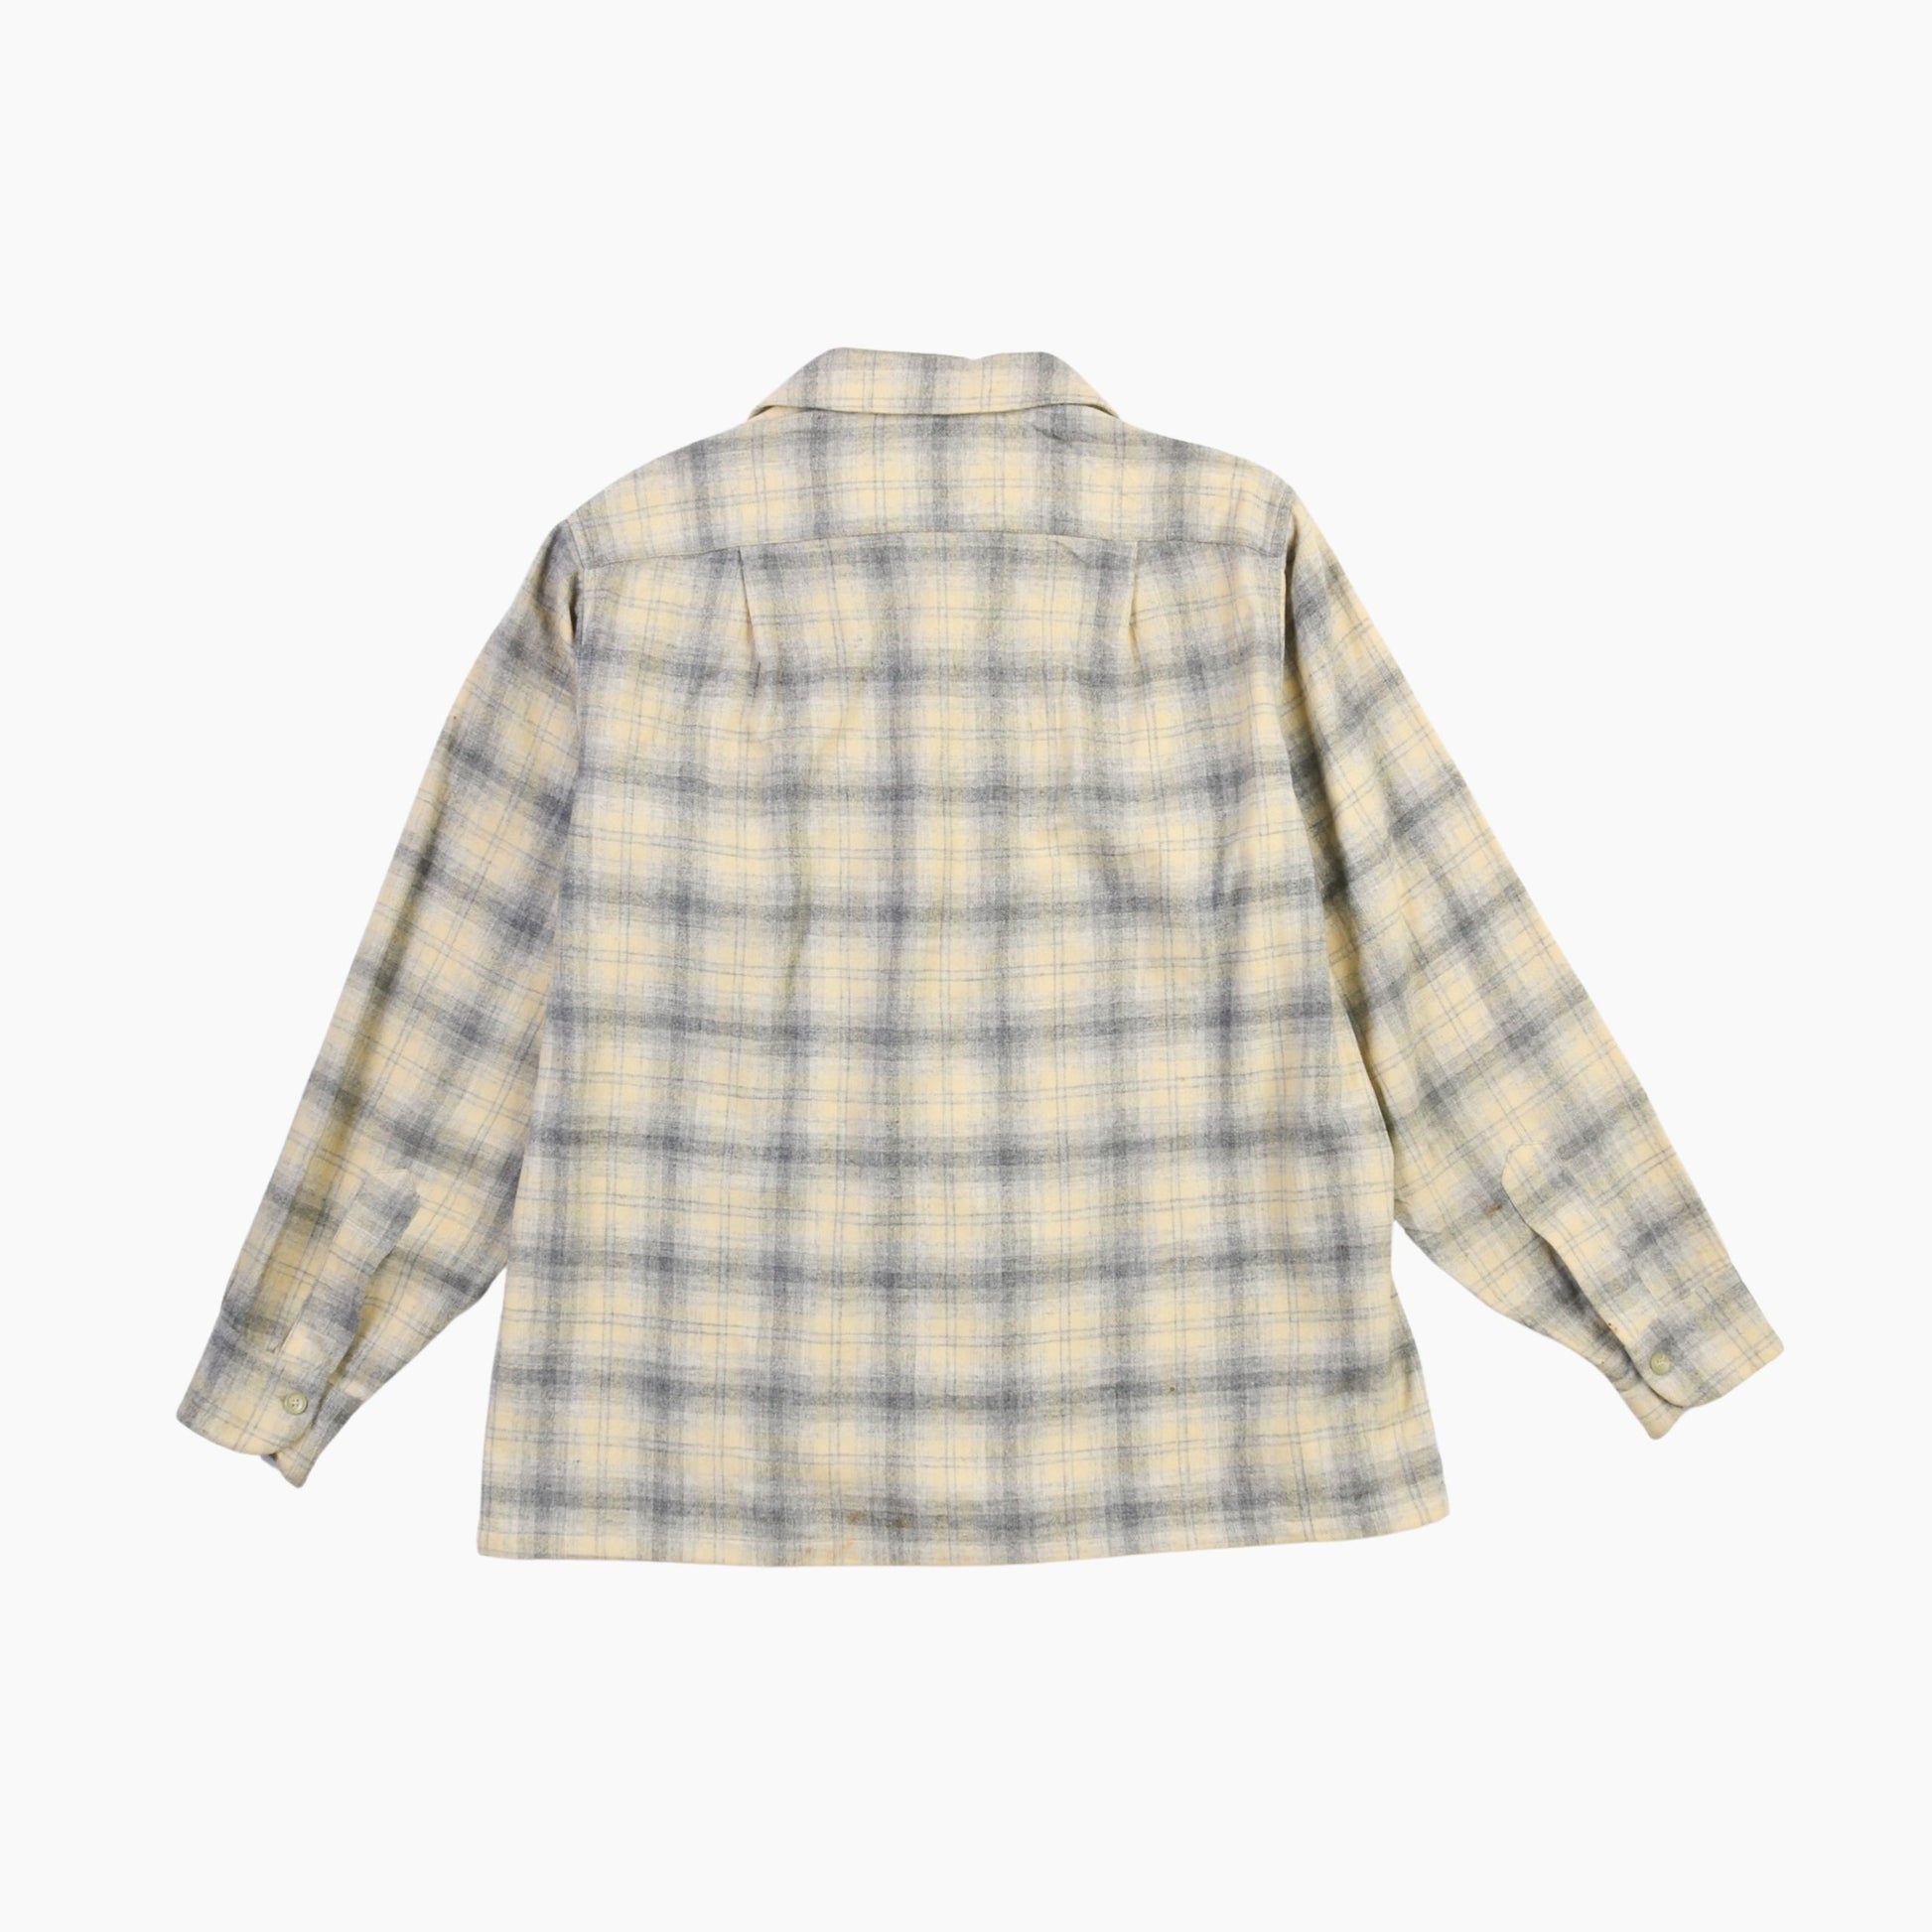 Vintage Flannel Board Shirt - American Madness